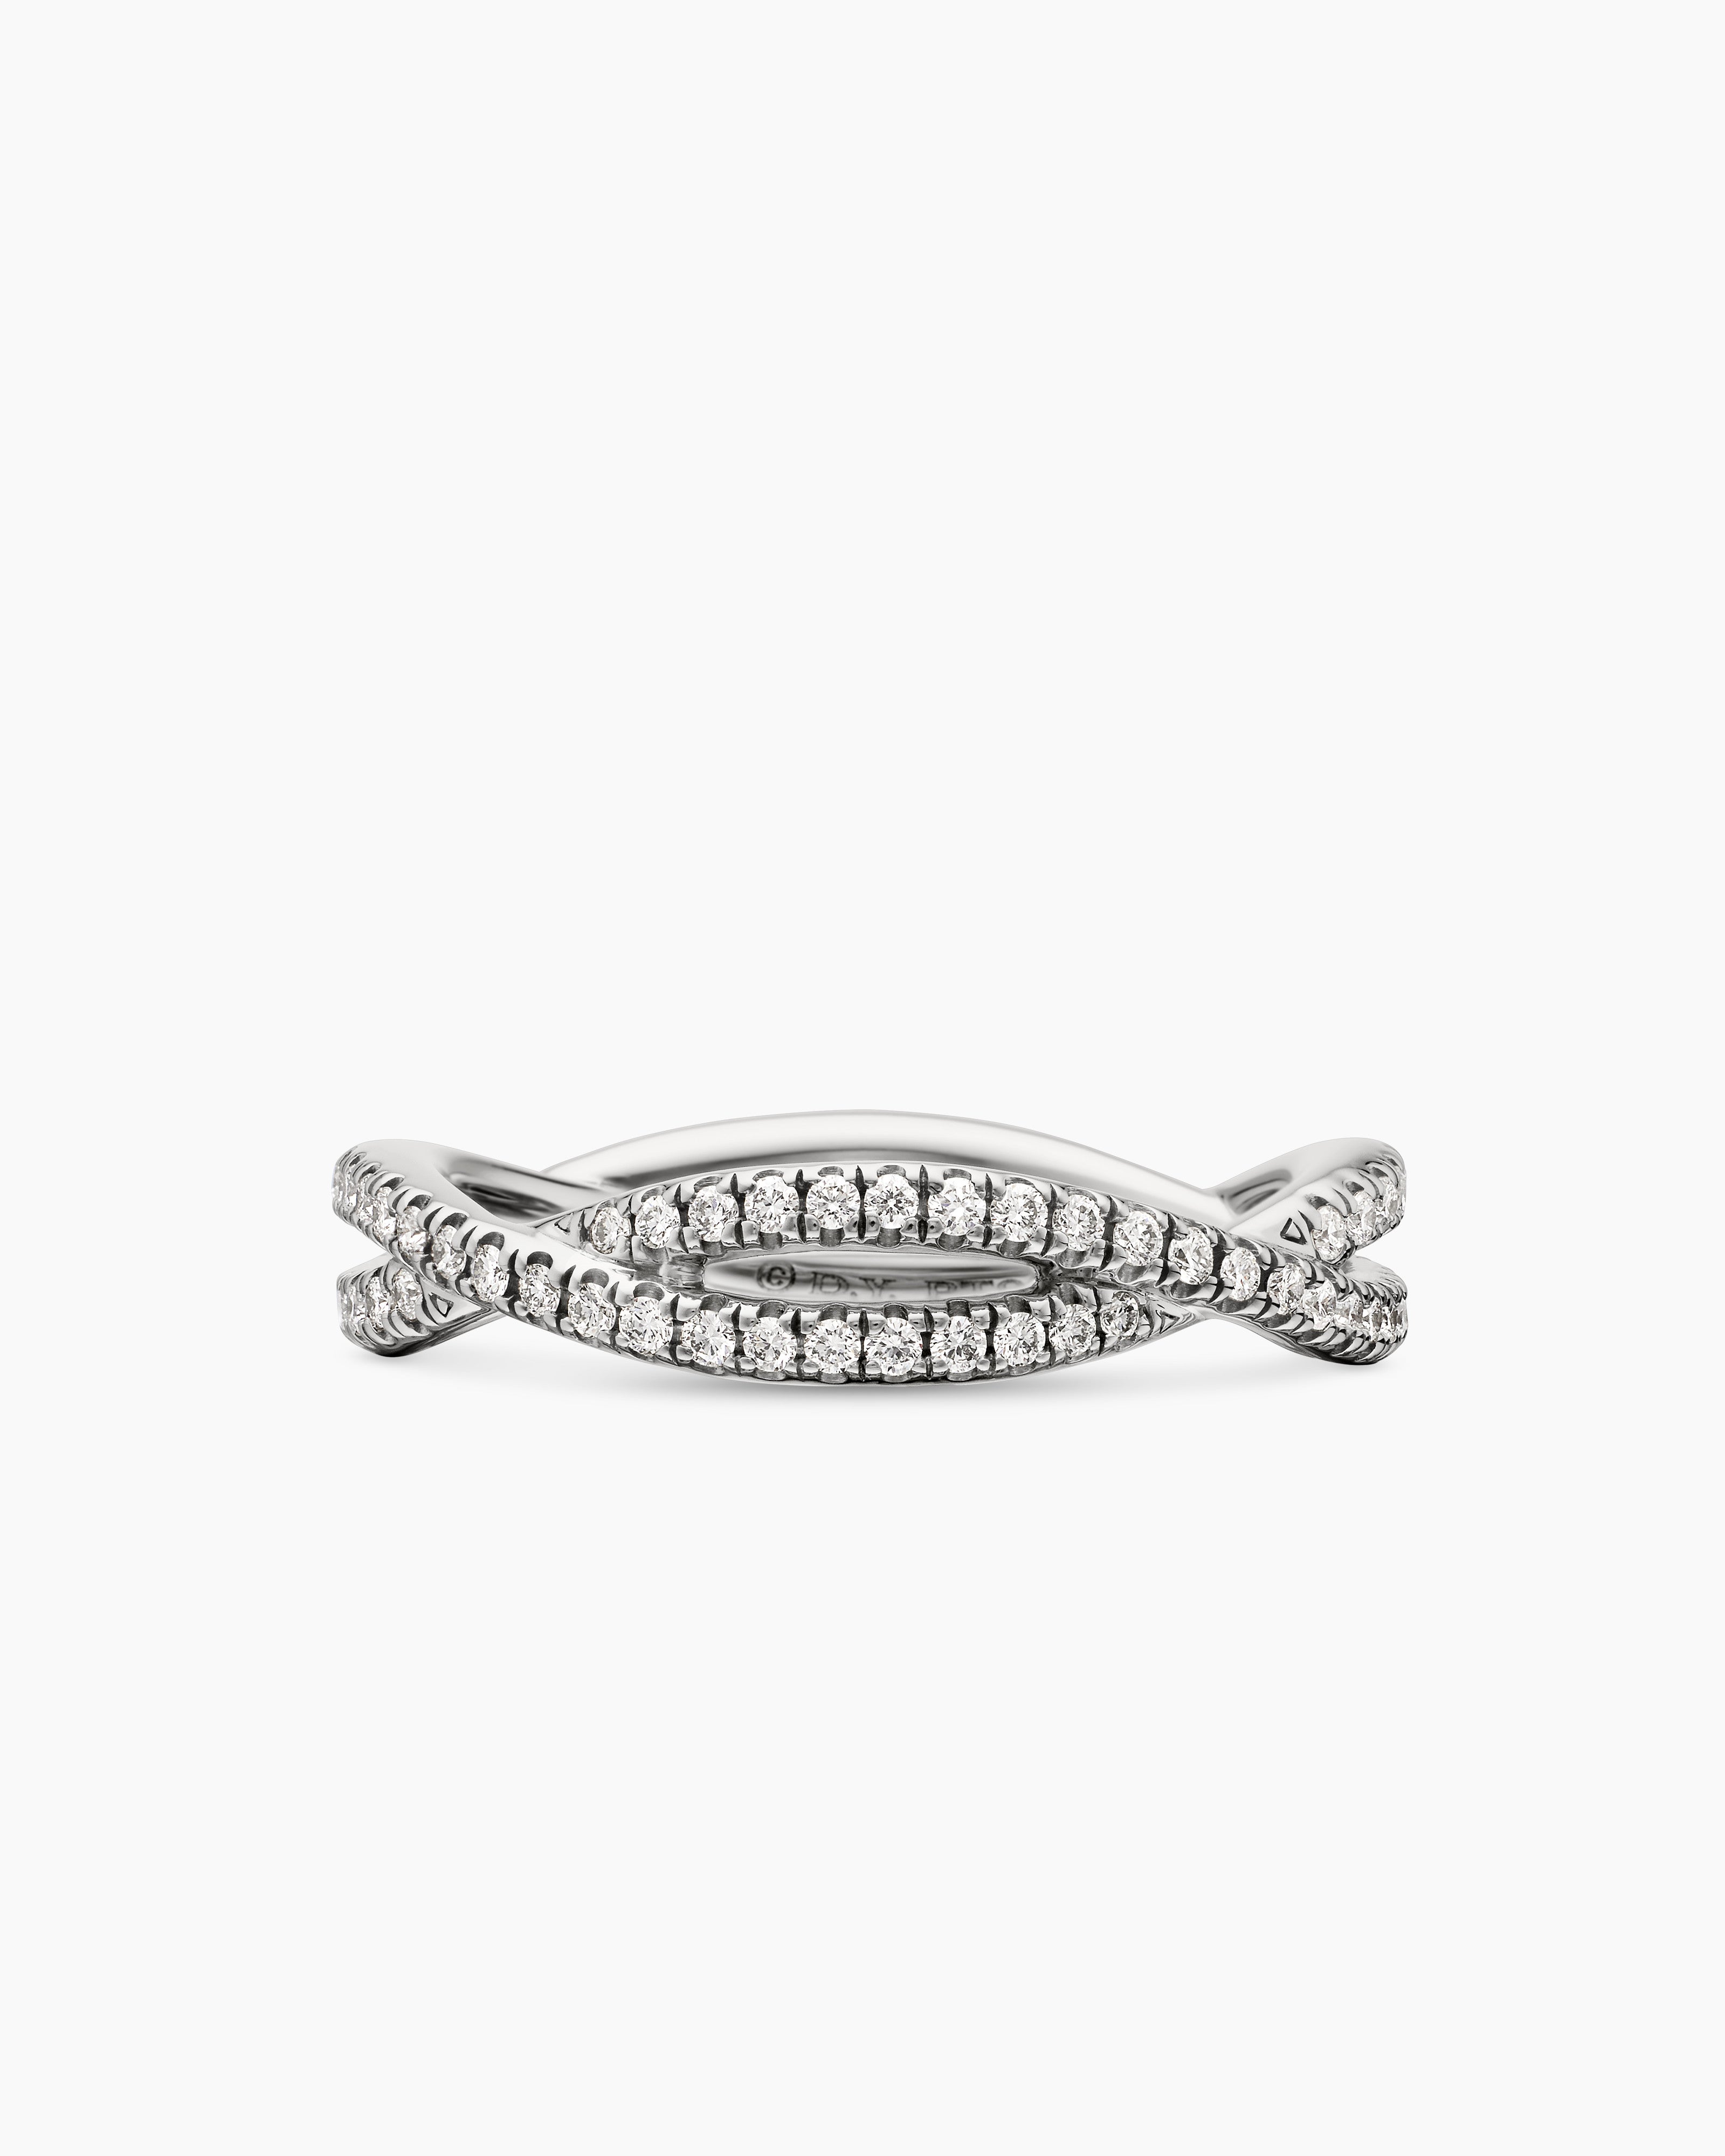 Buy Malabar Gold and Diamonds PT (950) Platinum gold Bands Ring for Women,  Platinum 950 gold certified FREVR10367_P_SI-GH_13 at Amazon.in